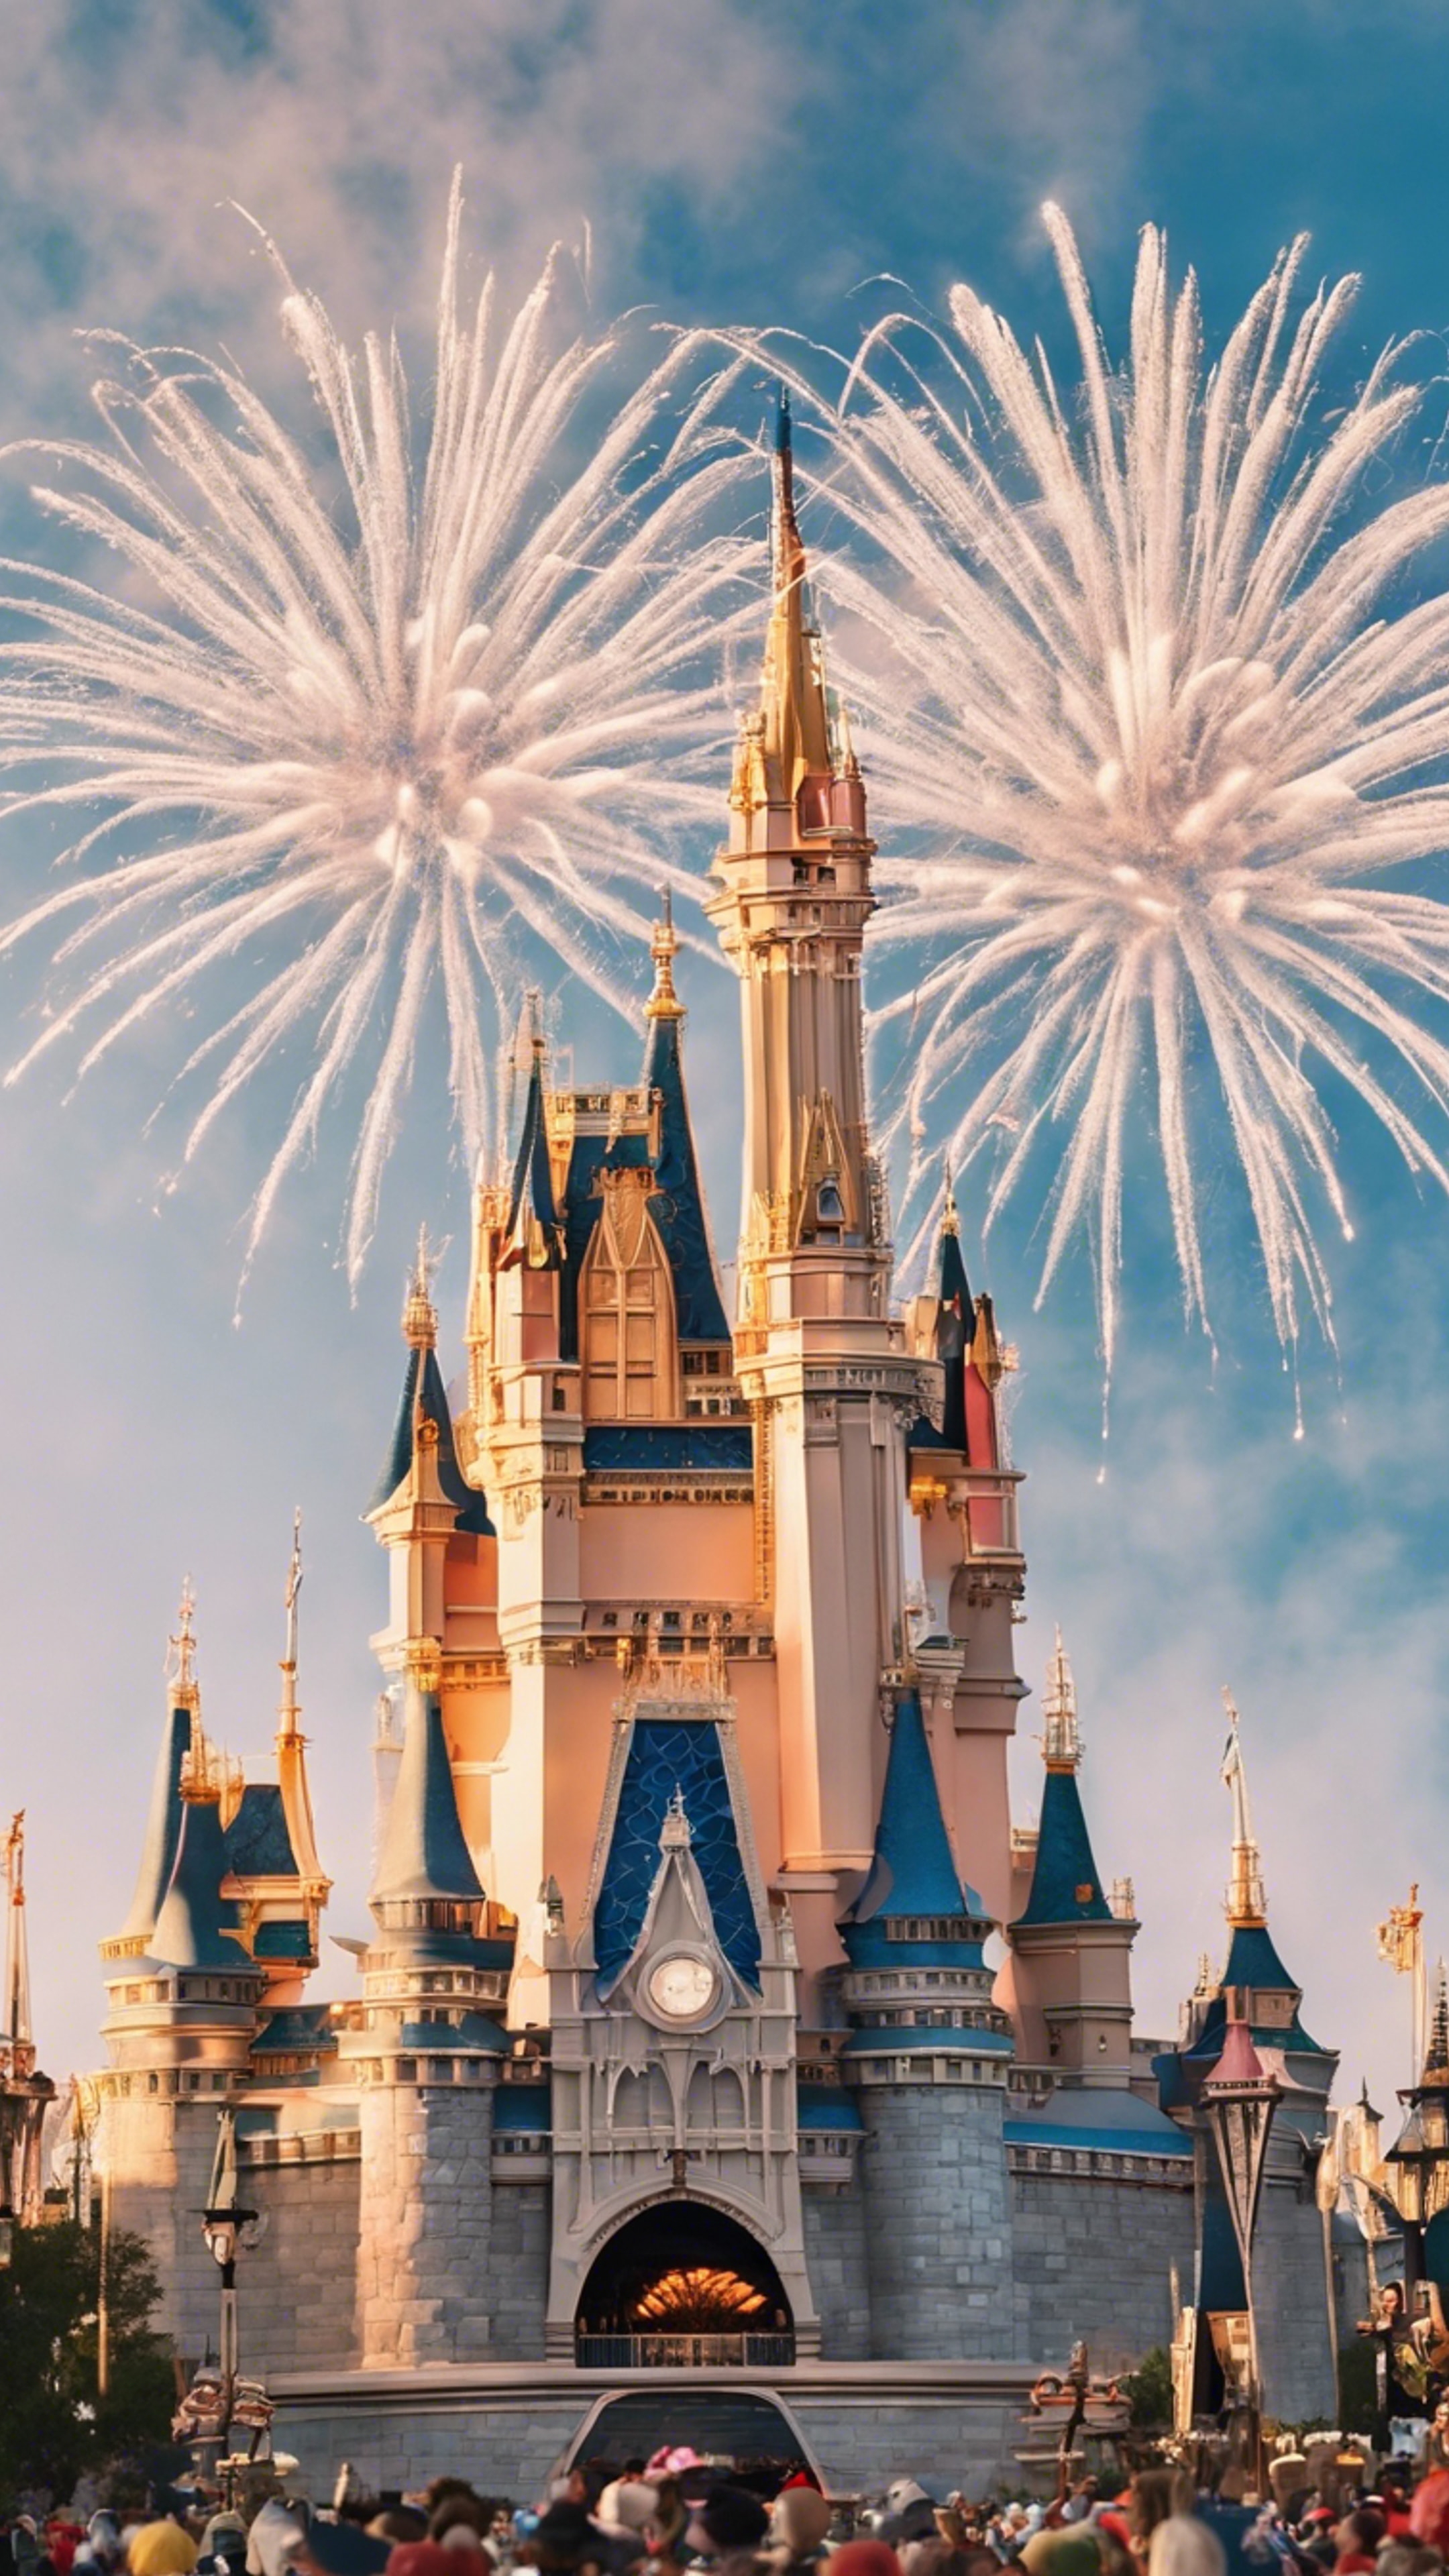 A dazzling firework display over Disney's Magic Kingdom, as seen from the Main Street U.S.A.壁紙[06ea505dccb744c89f0a]